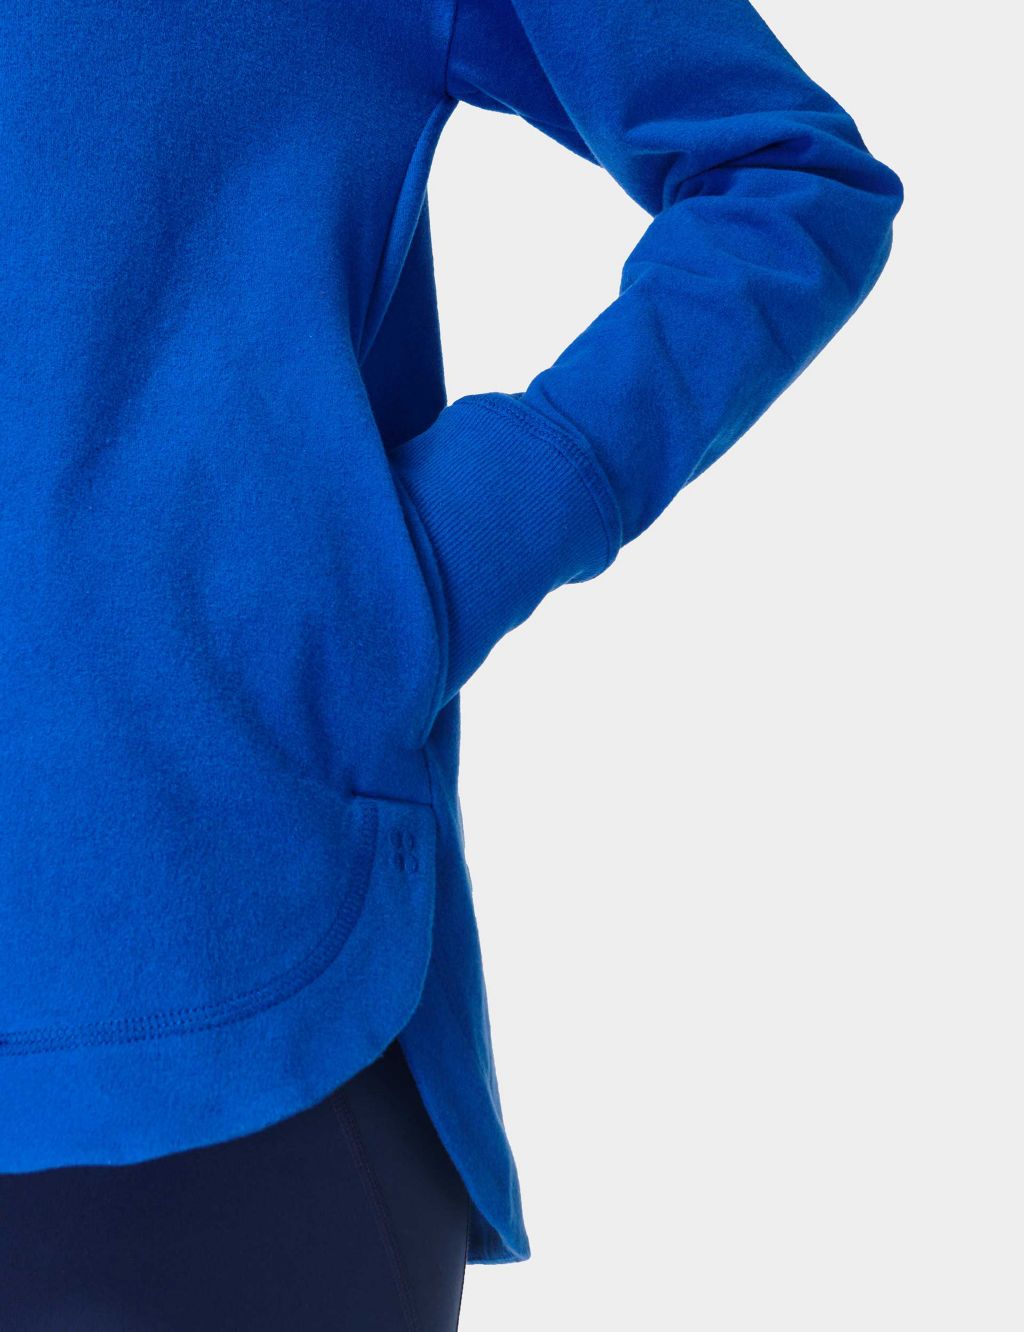 Escape Cotton Blend Fleece Relaxed Hoodie image 5